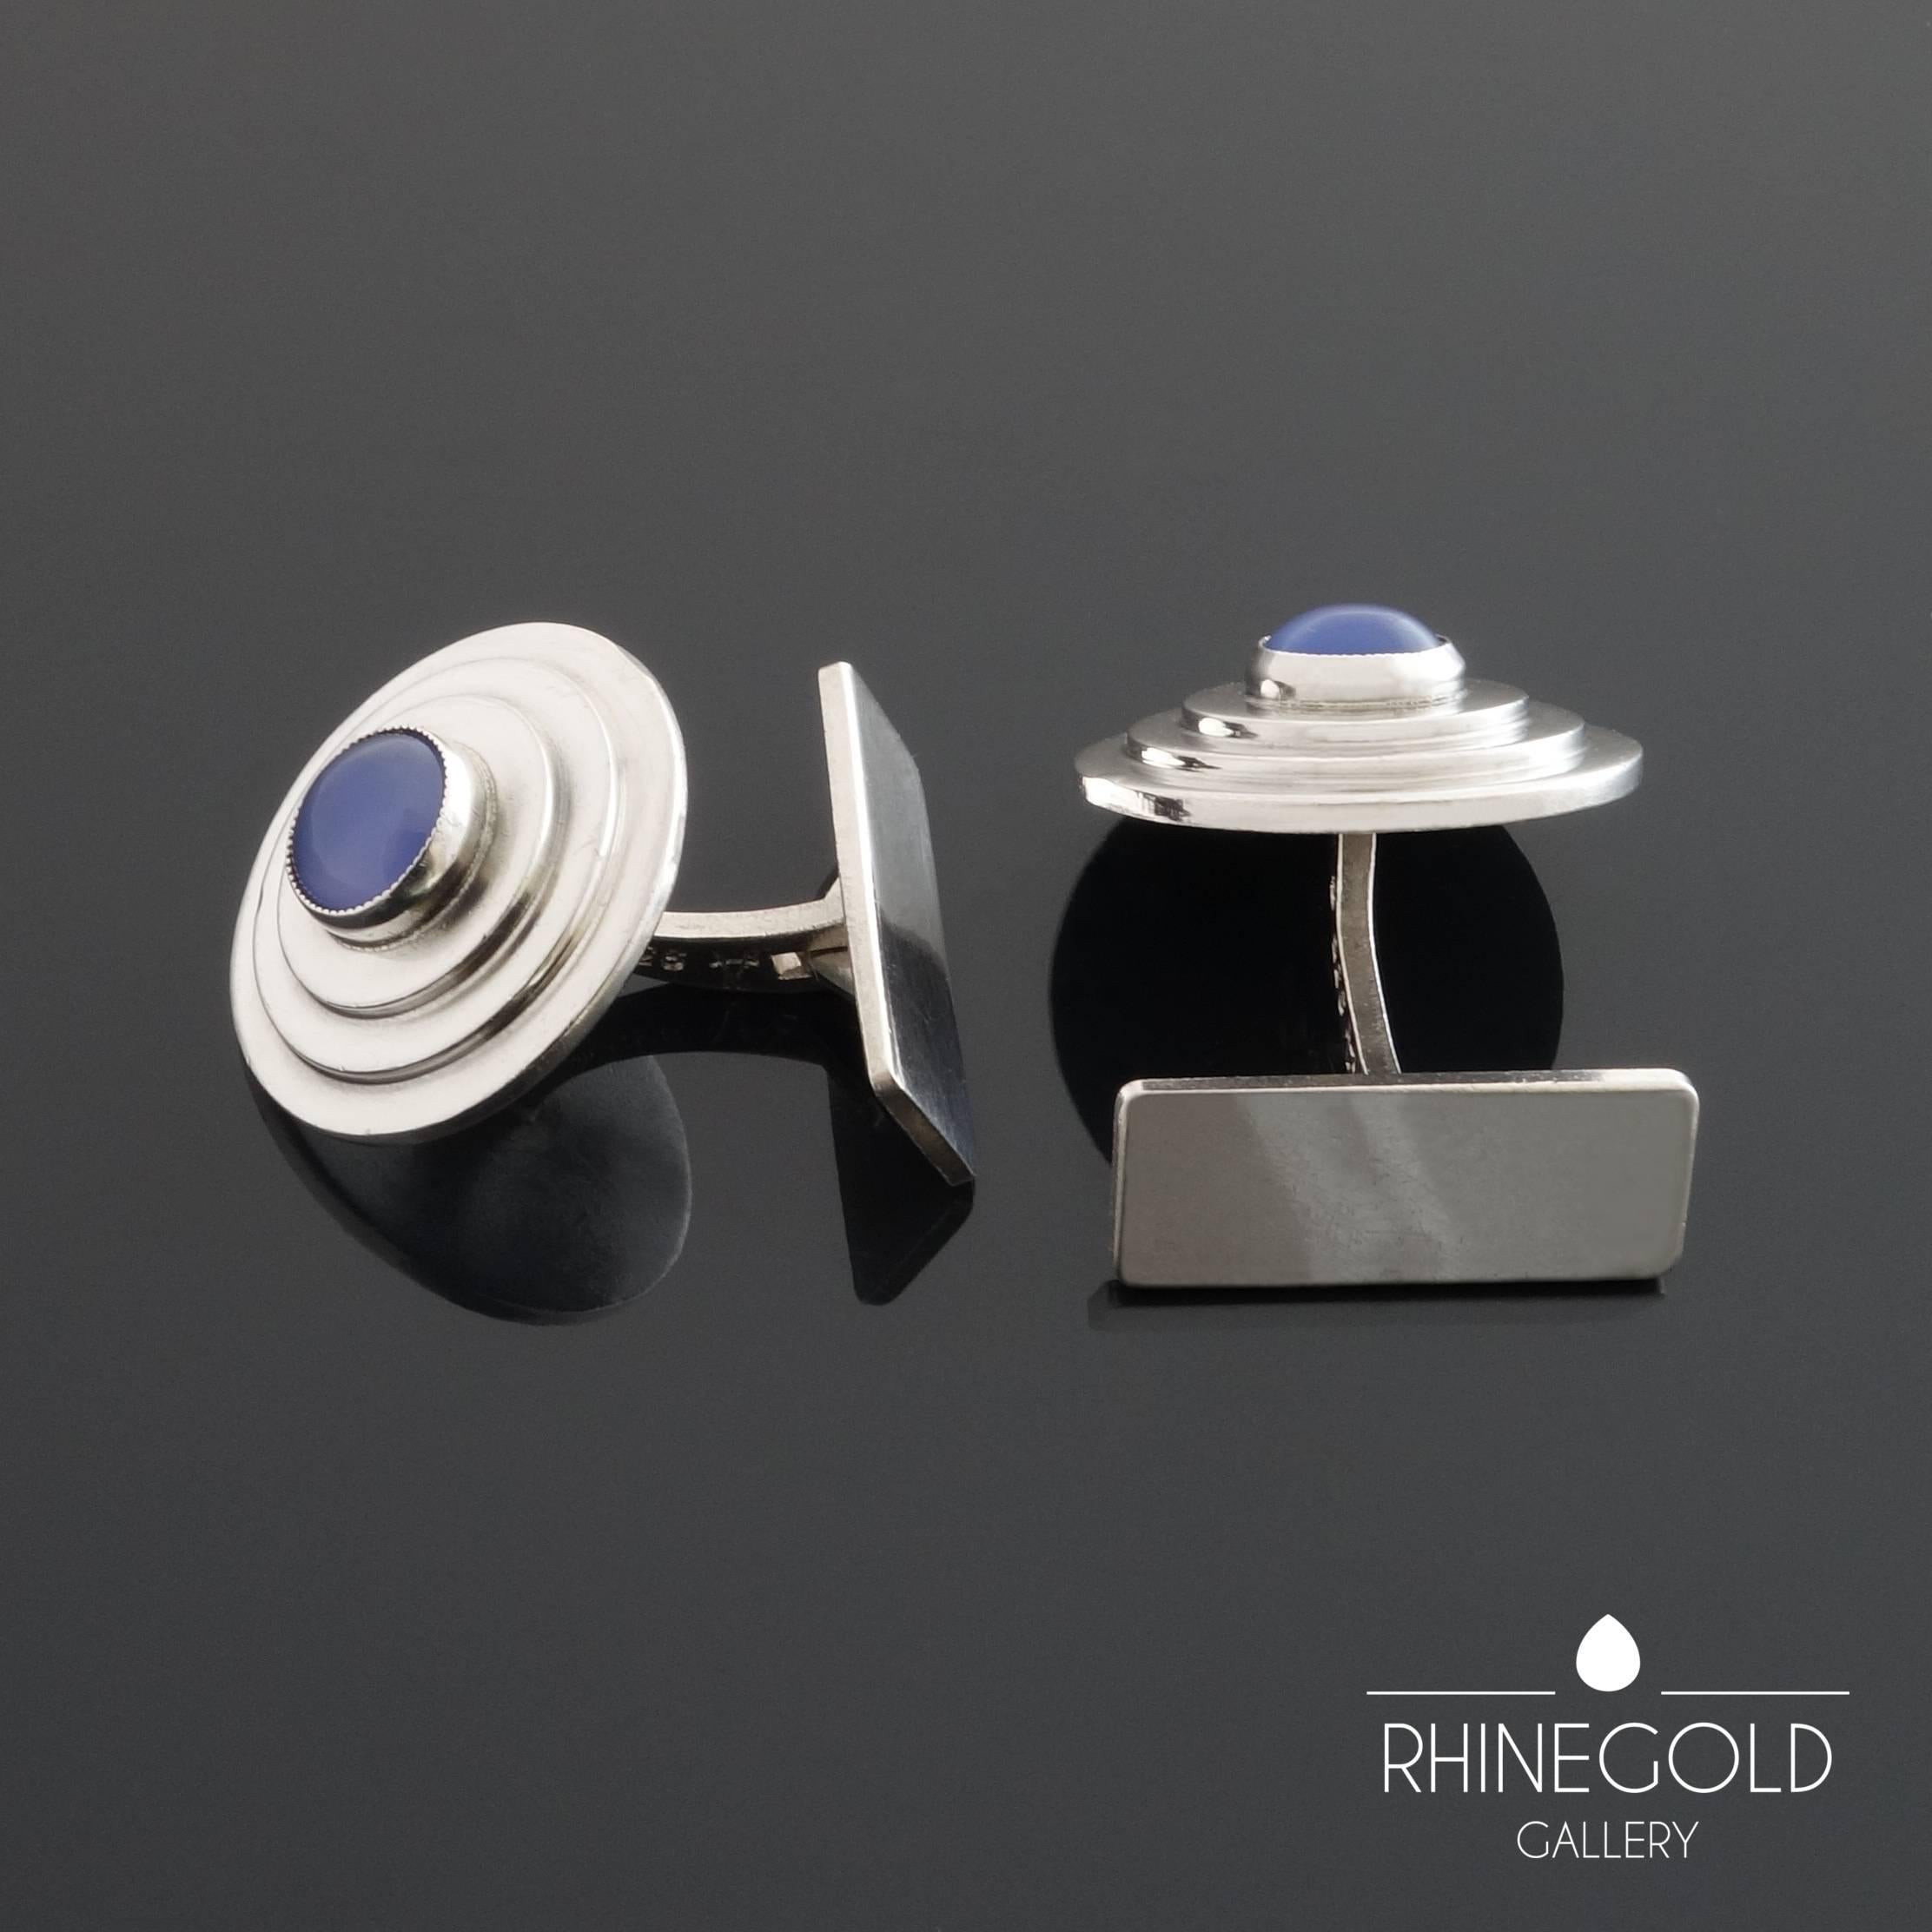 Otto Dinkelsbühler: A Pair of Art Deco Chalcedony Silver Cufflinks
Silver 935, chalecedony
Front: Ø 1.95 cm (approx. 3/4 in)
Marks: maker's mark, silver content mark '935', crown, crescent
Munich, Germany, 1920s - 1930s

A rare and collectable pair